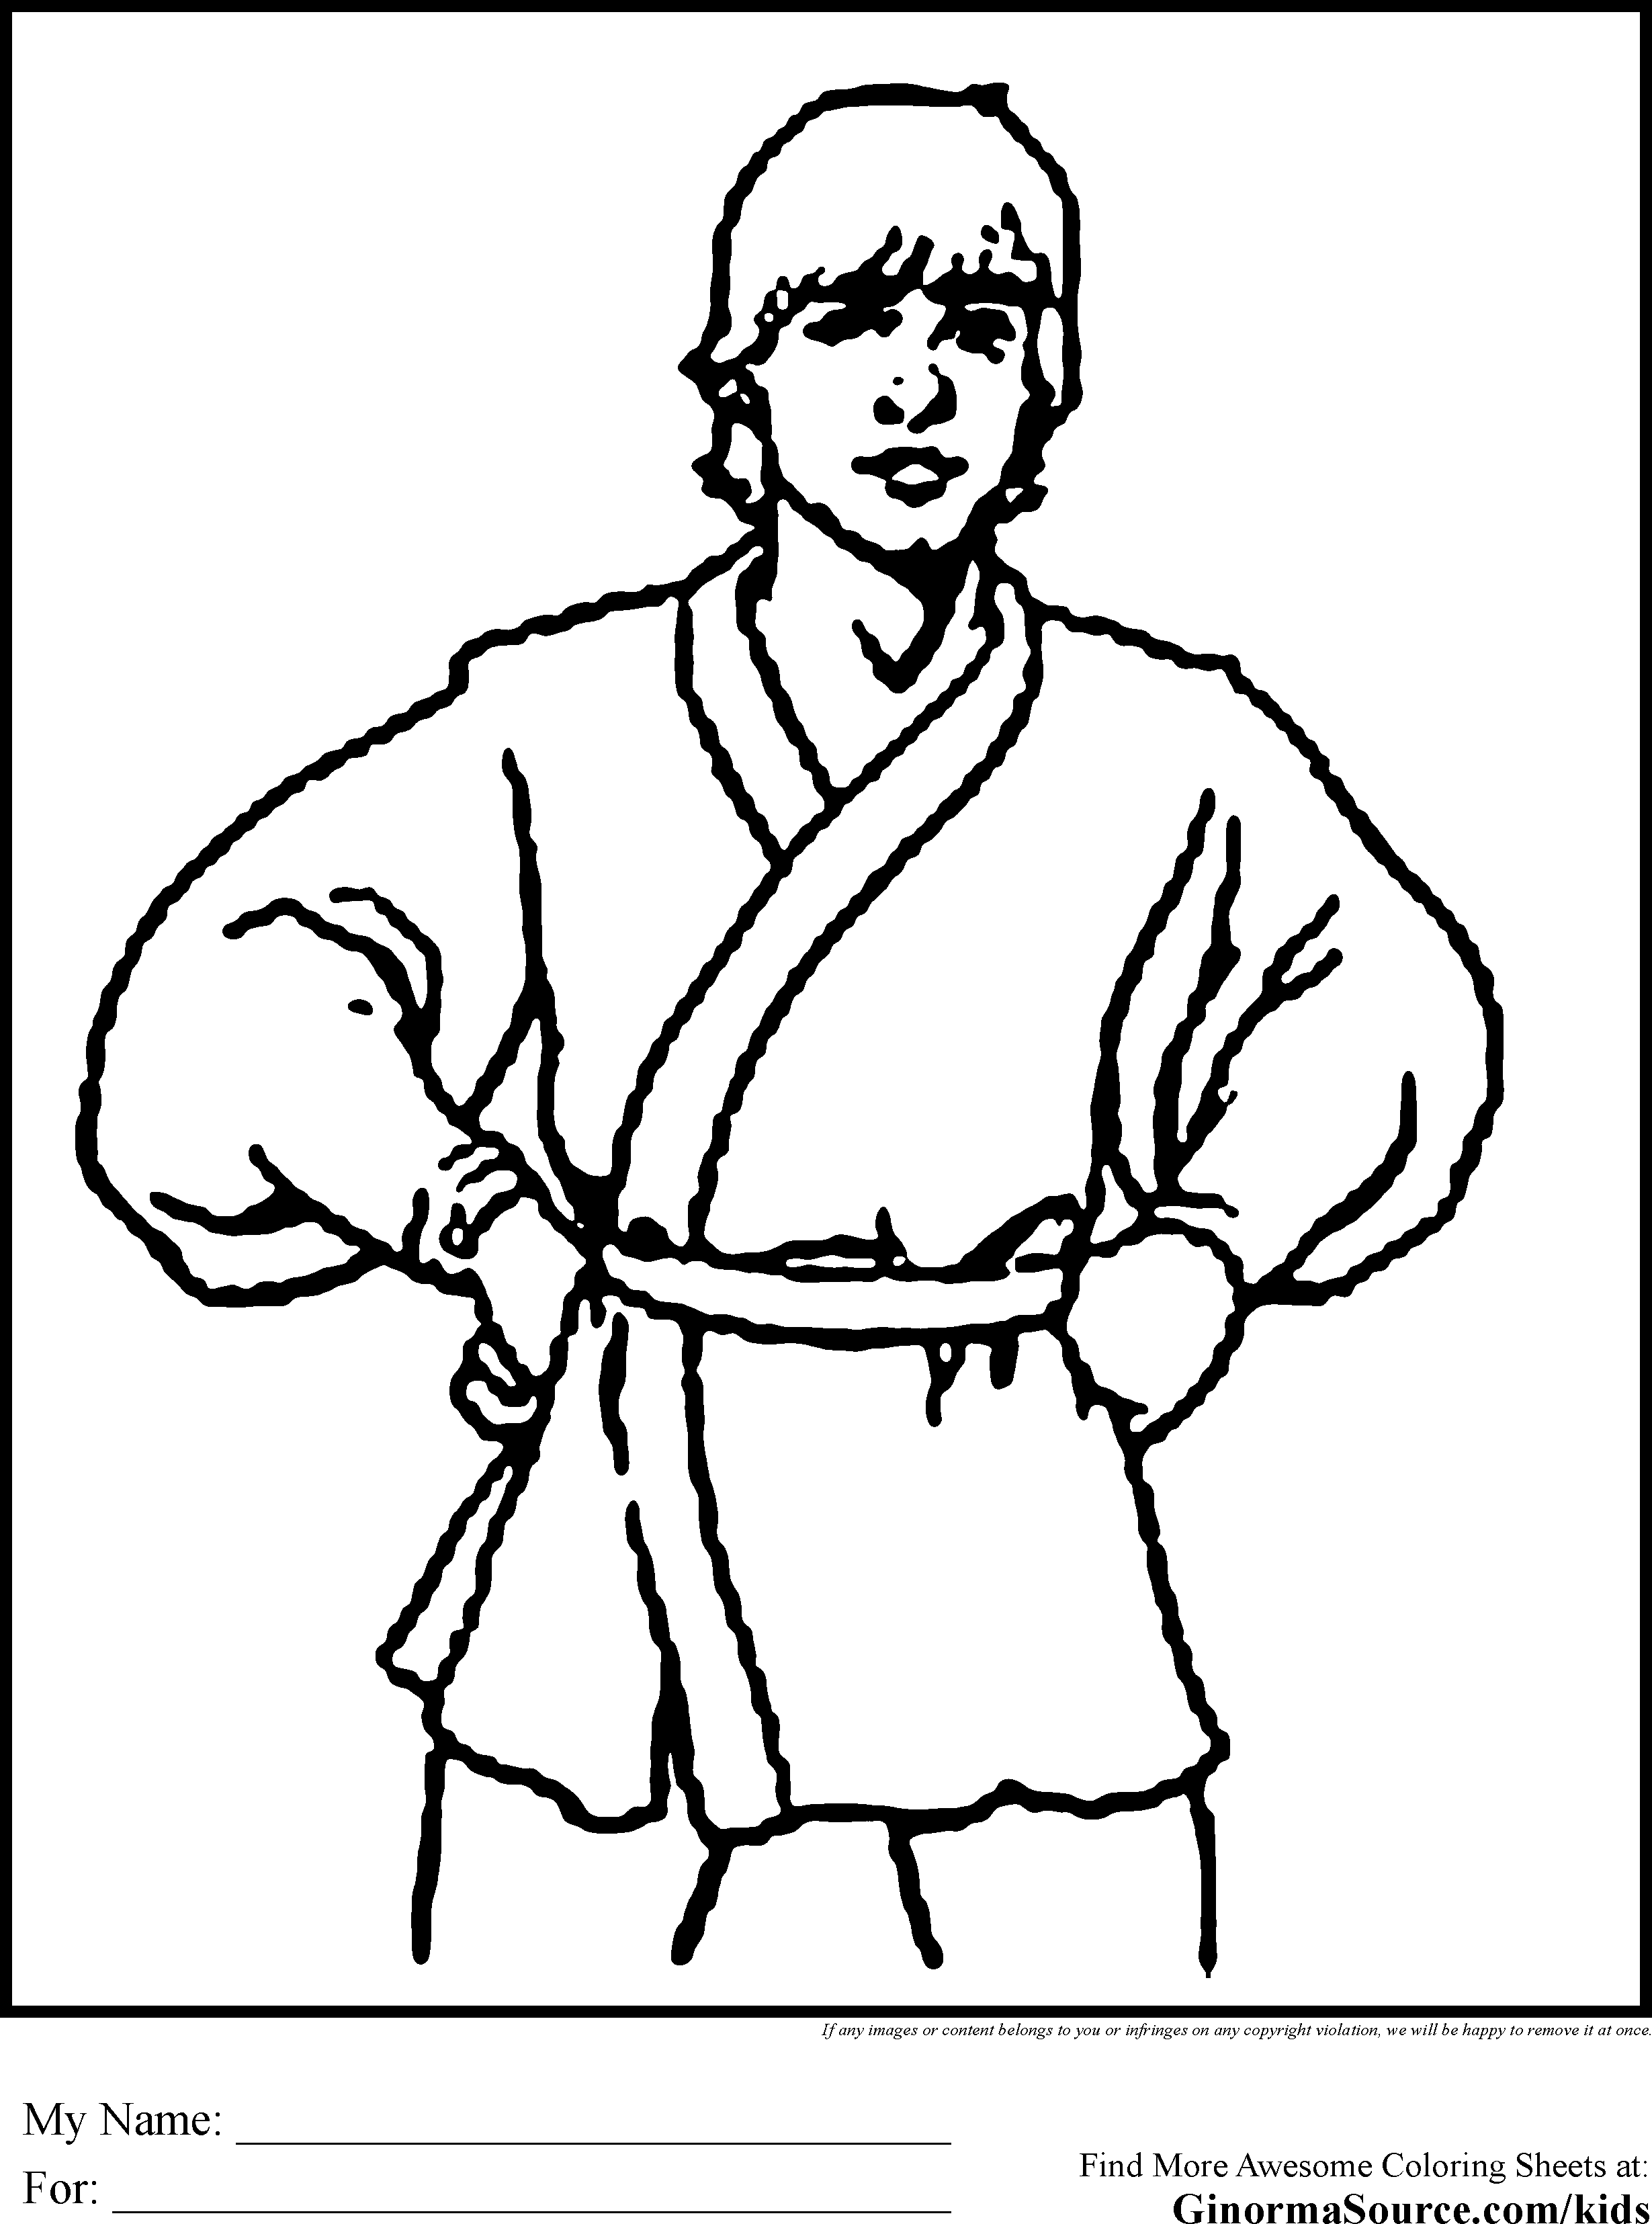 Anakin Skywalker Coloring Page - Coloring Home